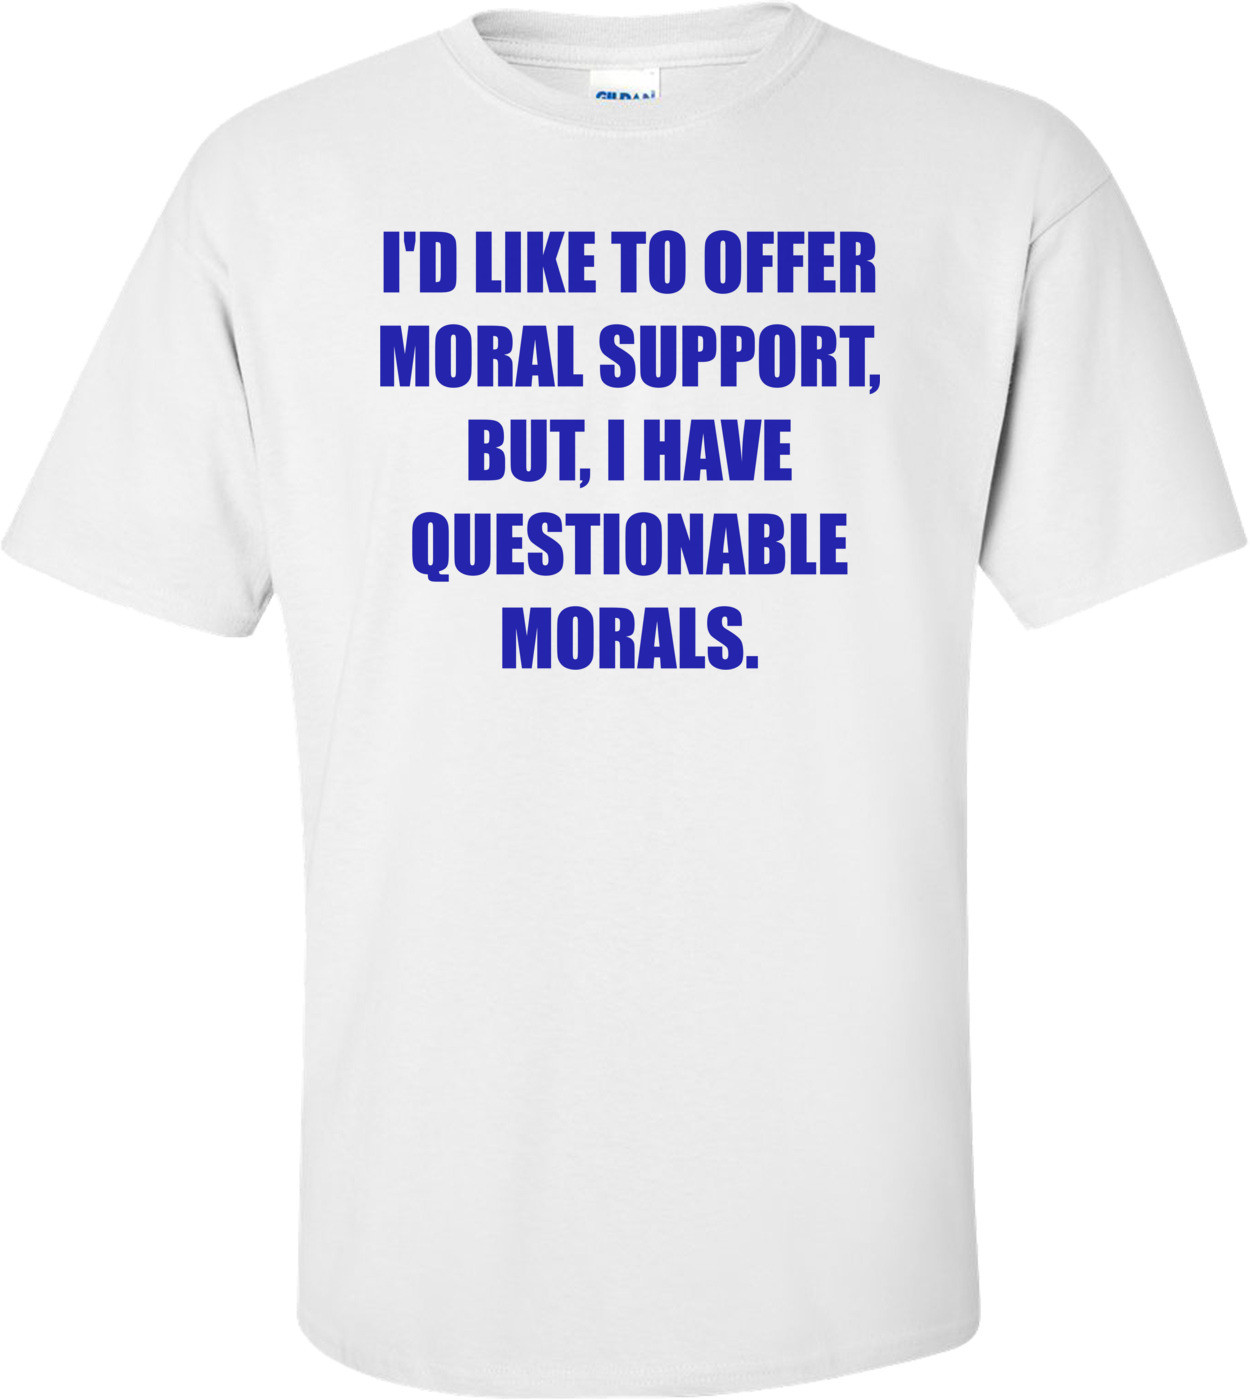 I'D LIKE TO OFFER MORAL SUPPORT, BUT, I HAVE QUESTIONABLE MORALS. Shirt